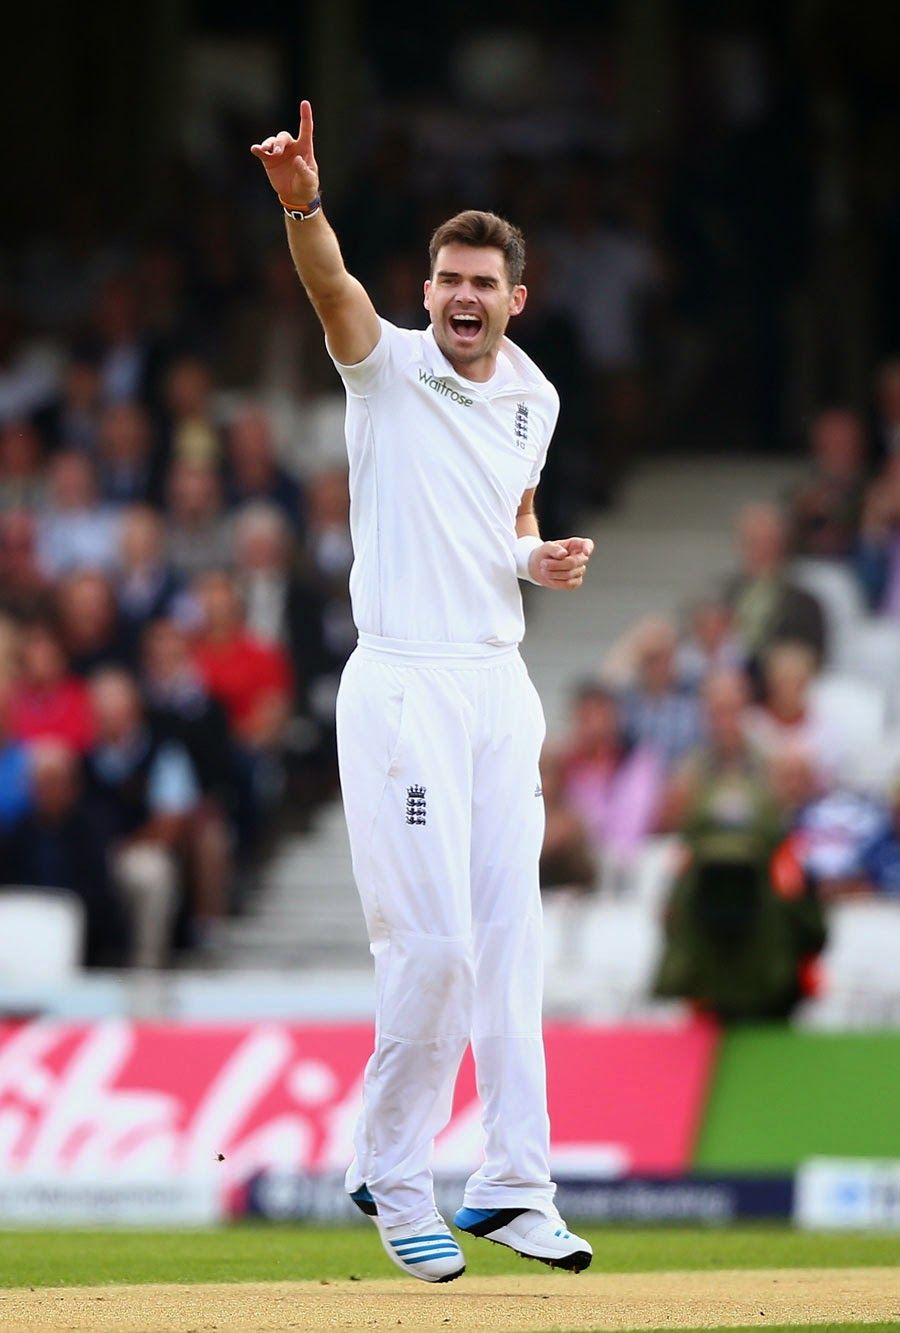 James Anderson Wallpaper Free James Anderson Background